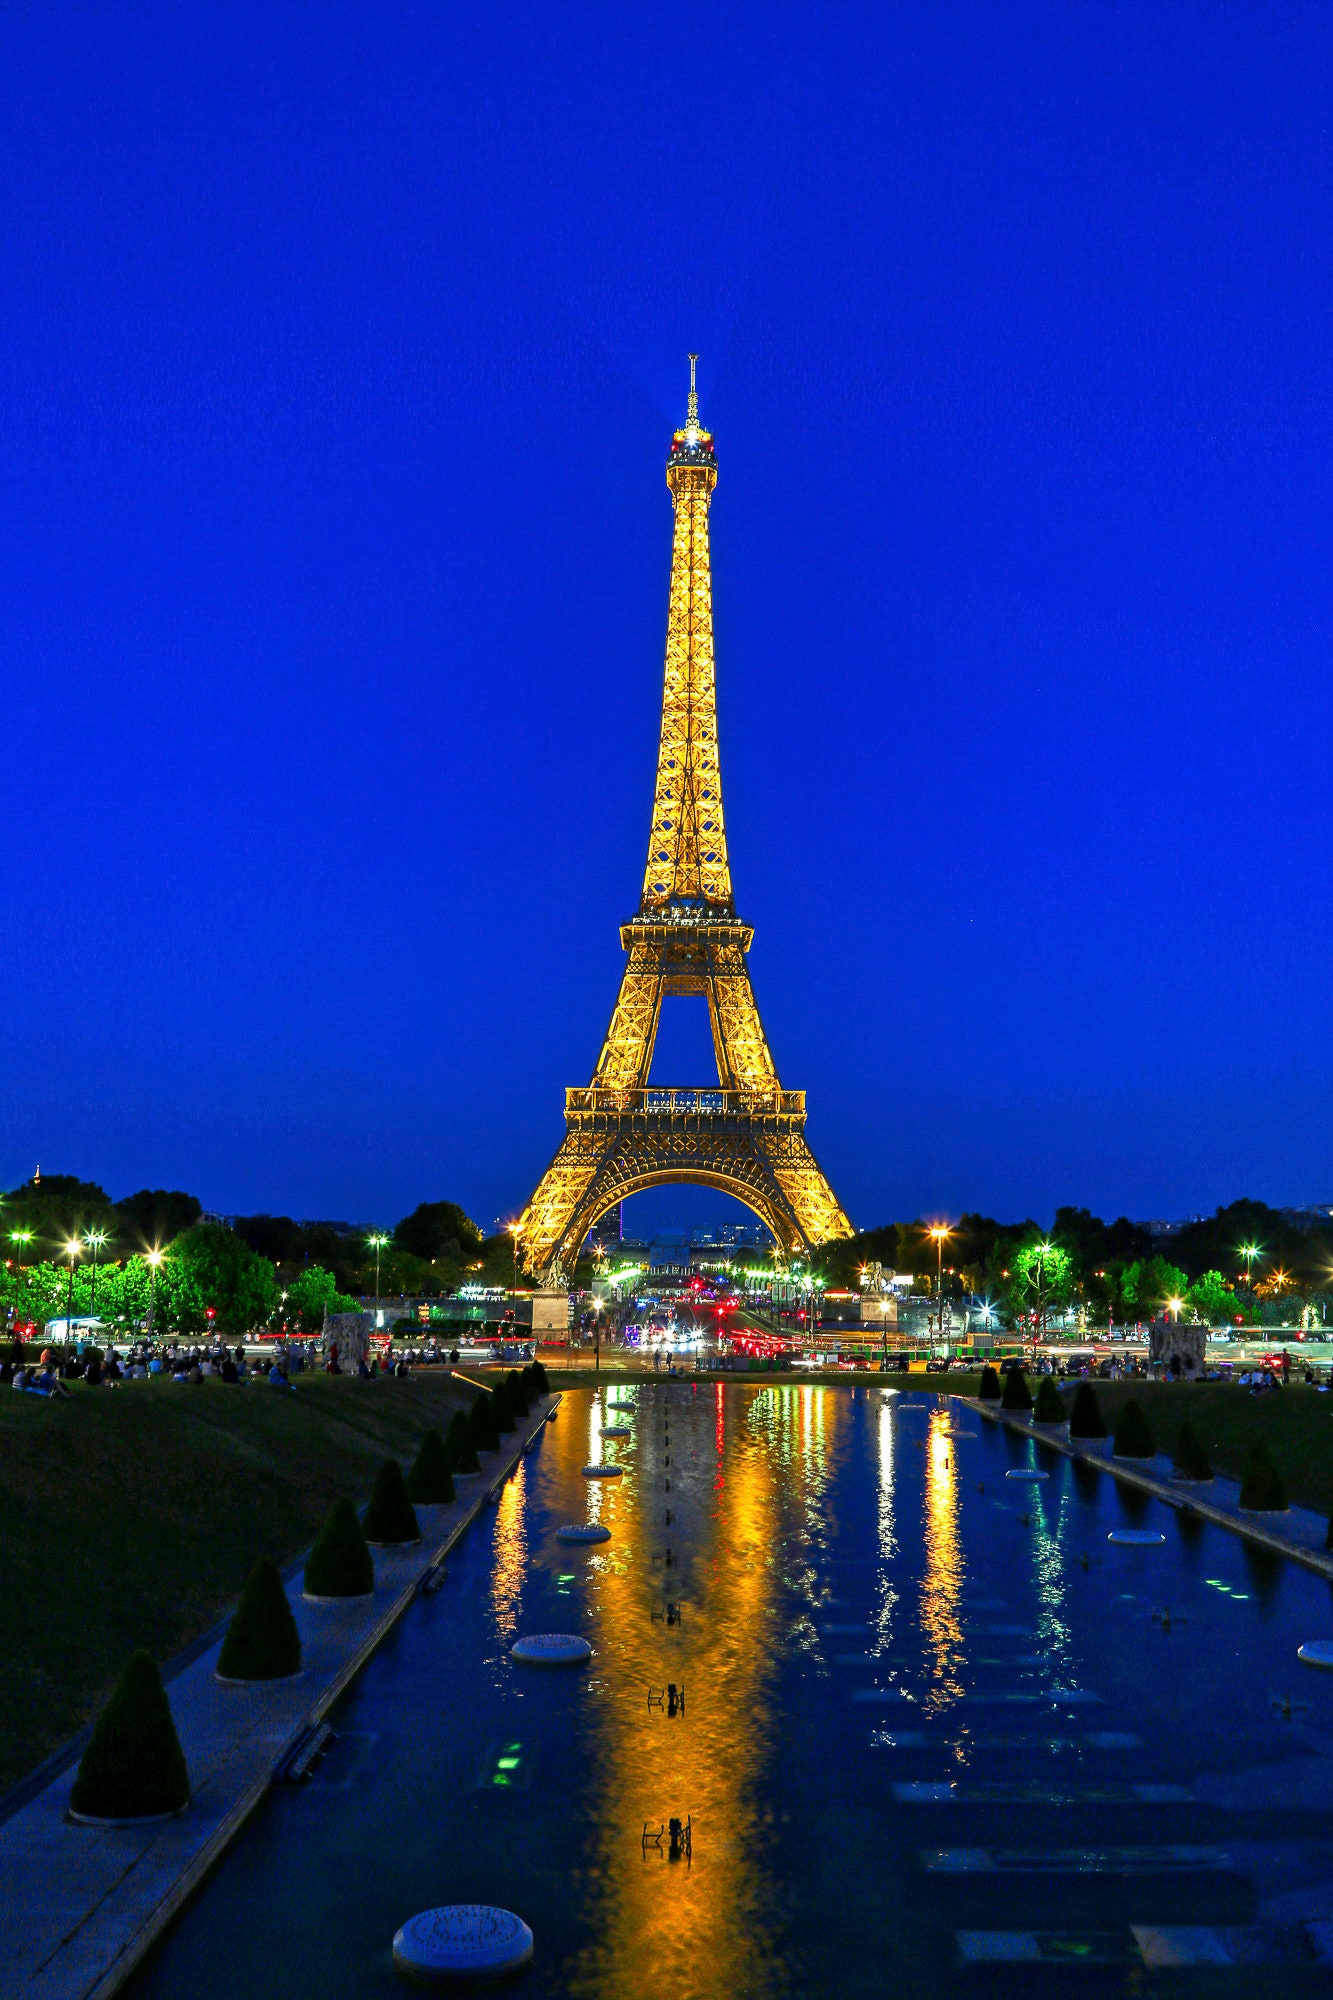 All about the Eiffel Tower by night in Paris